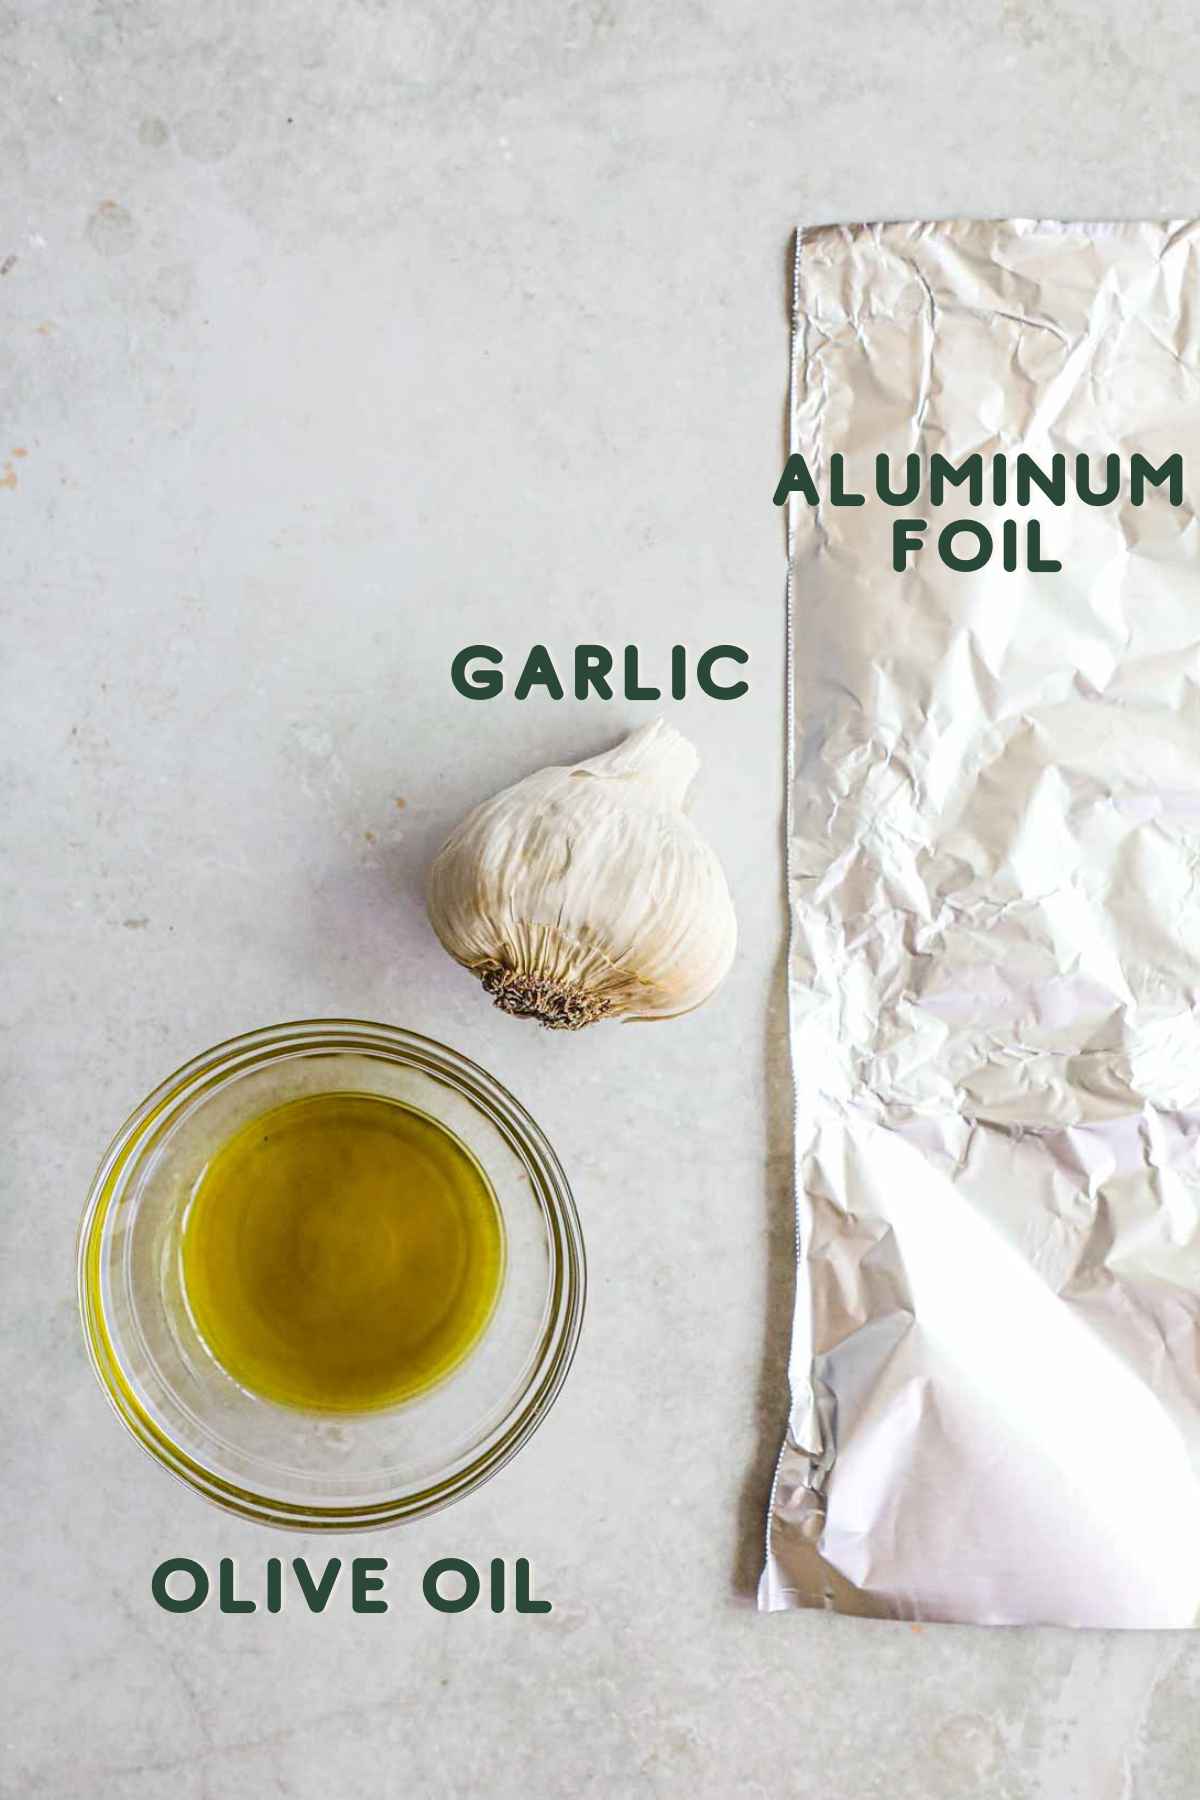 Ingredients to make oven-roasted garlic, including aluminum foil, garlic bulb, and olive oil.